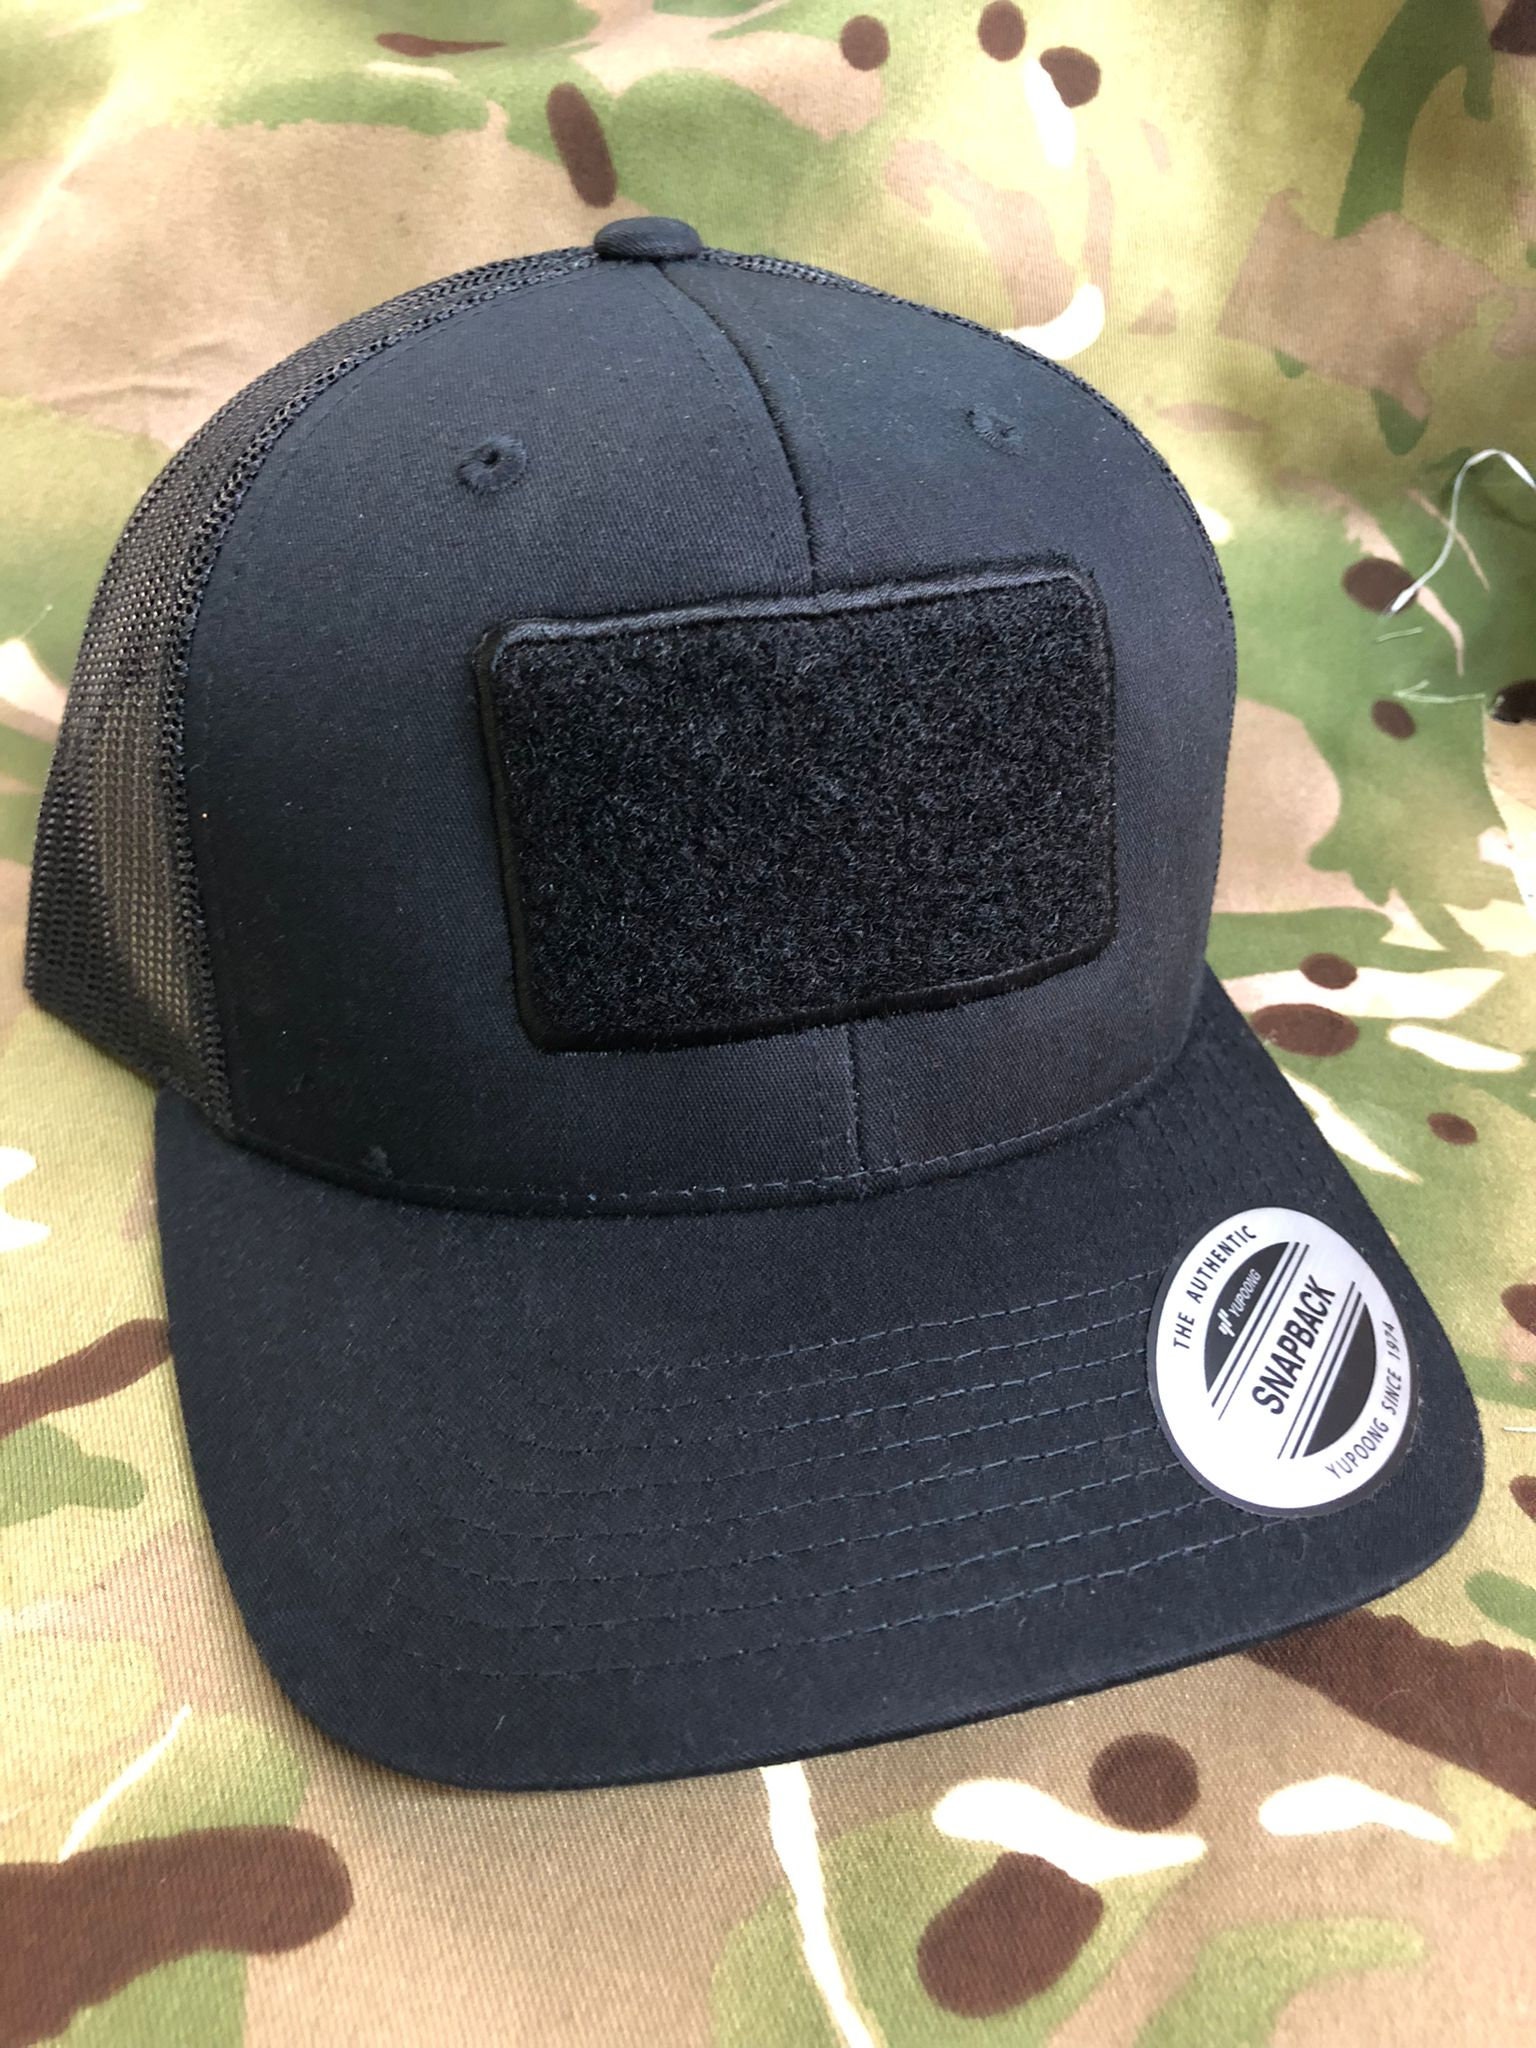 Embroidered Cap Etsy Flexfit Patch Trucker Back Velcro Hat Yupoong Shooters Logo - CAP Tactical Tacticool Stretch